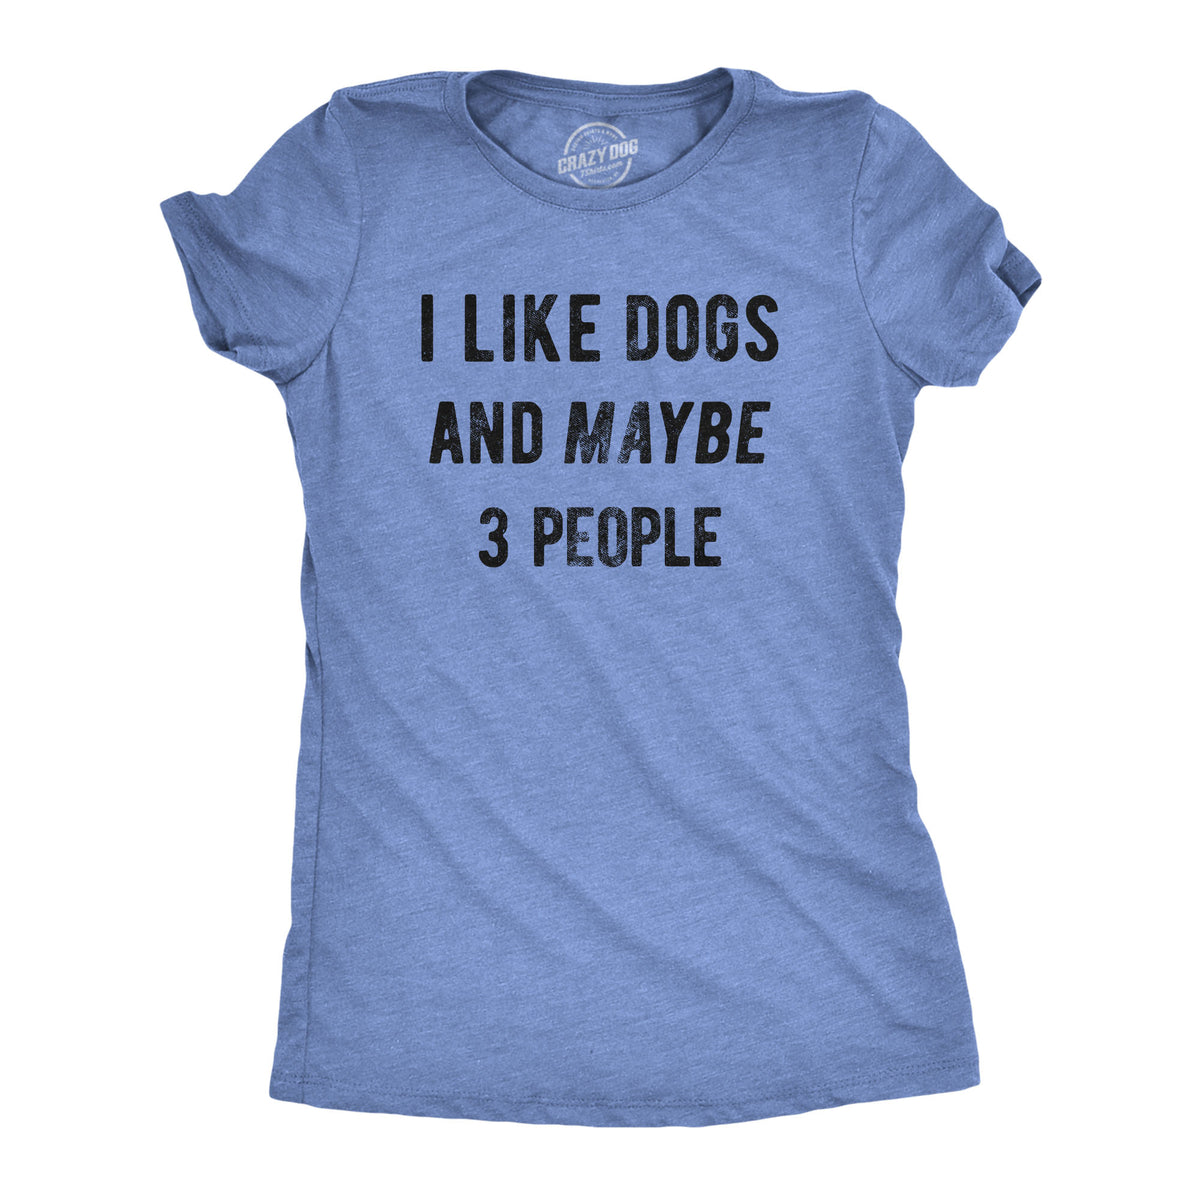 Funny Heather Light Blue I Like Dogs And Maybe 3 People Womens T Shirt Nerdy Dog Tee